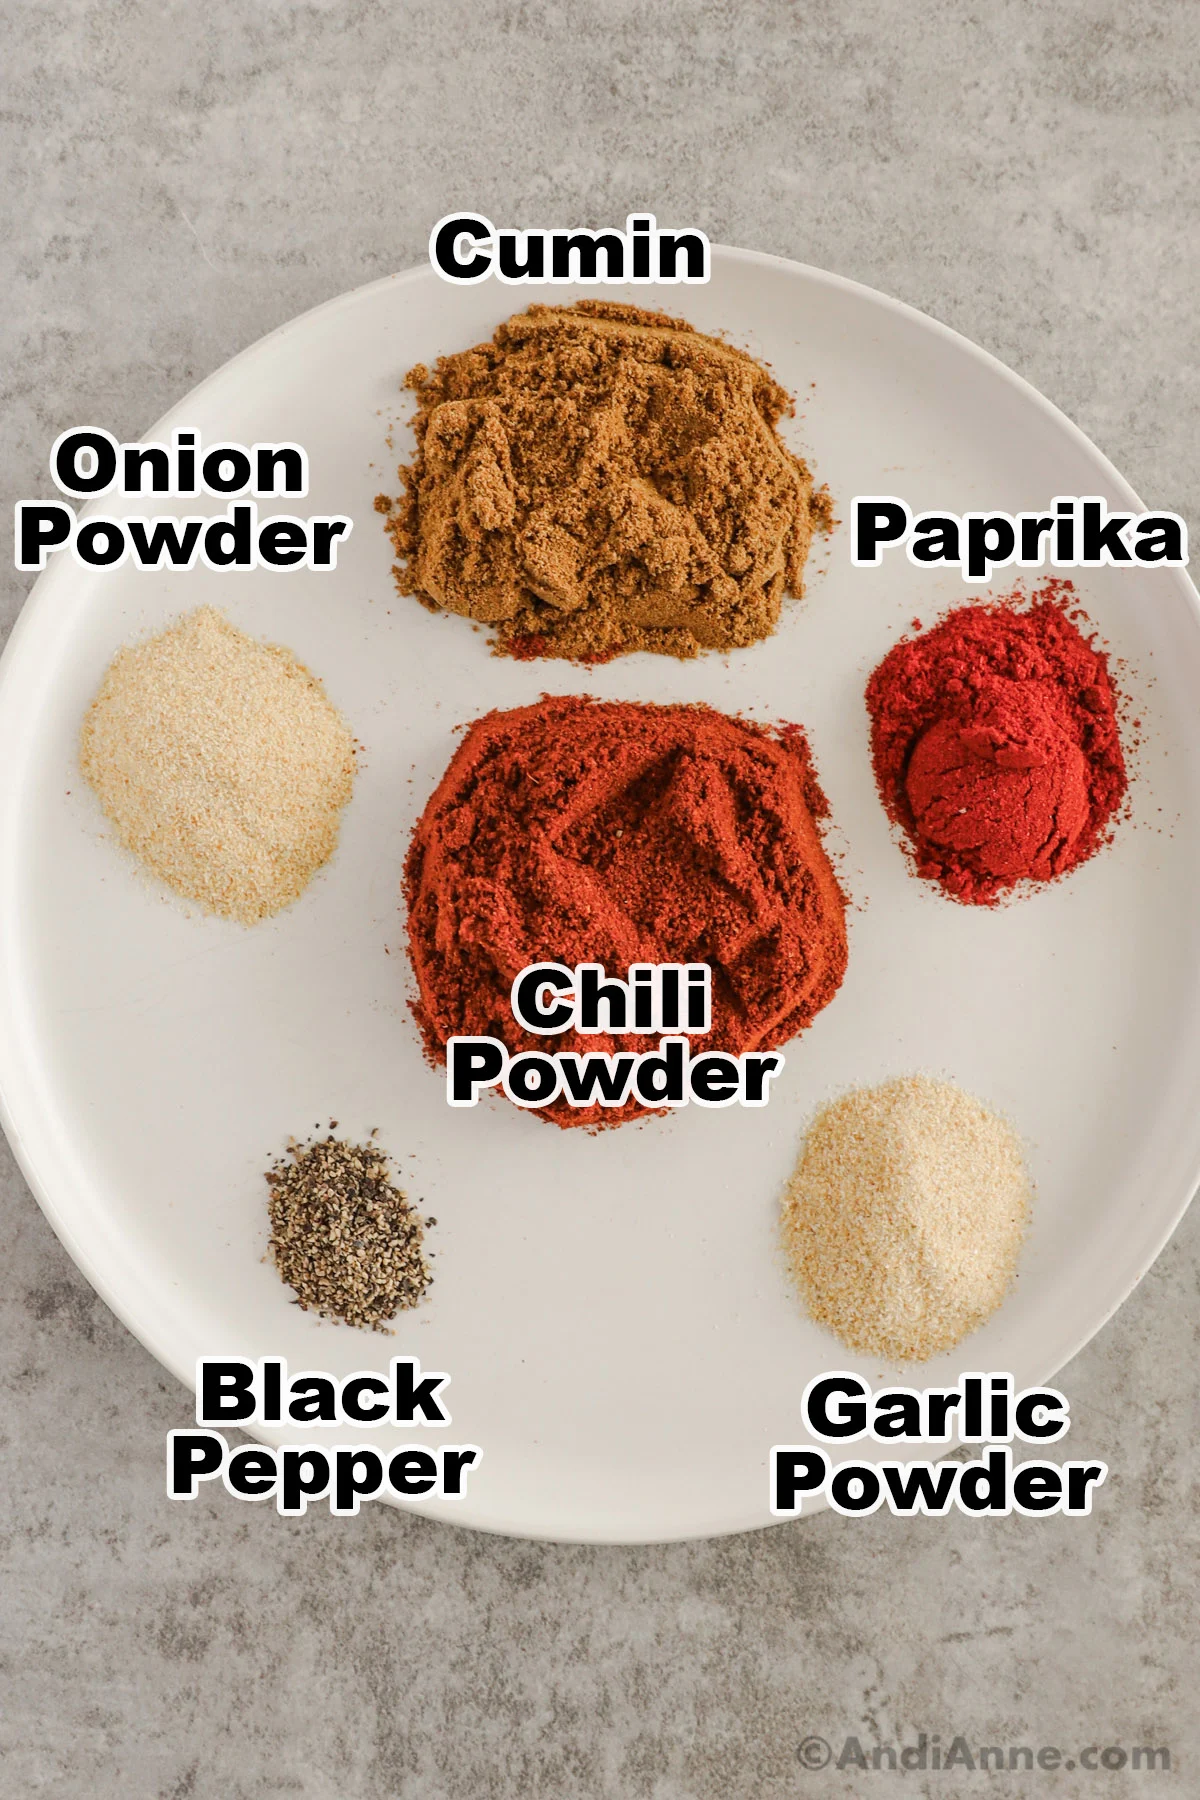 A plate with different spices in piles including cumin, paprika, onion powder, chili powder, black pepper, and garlic powder.